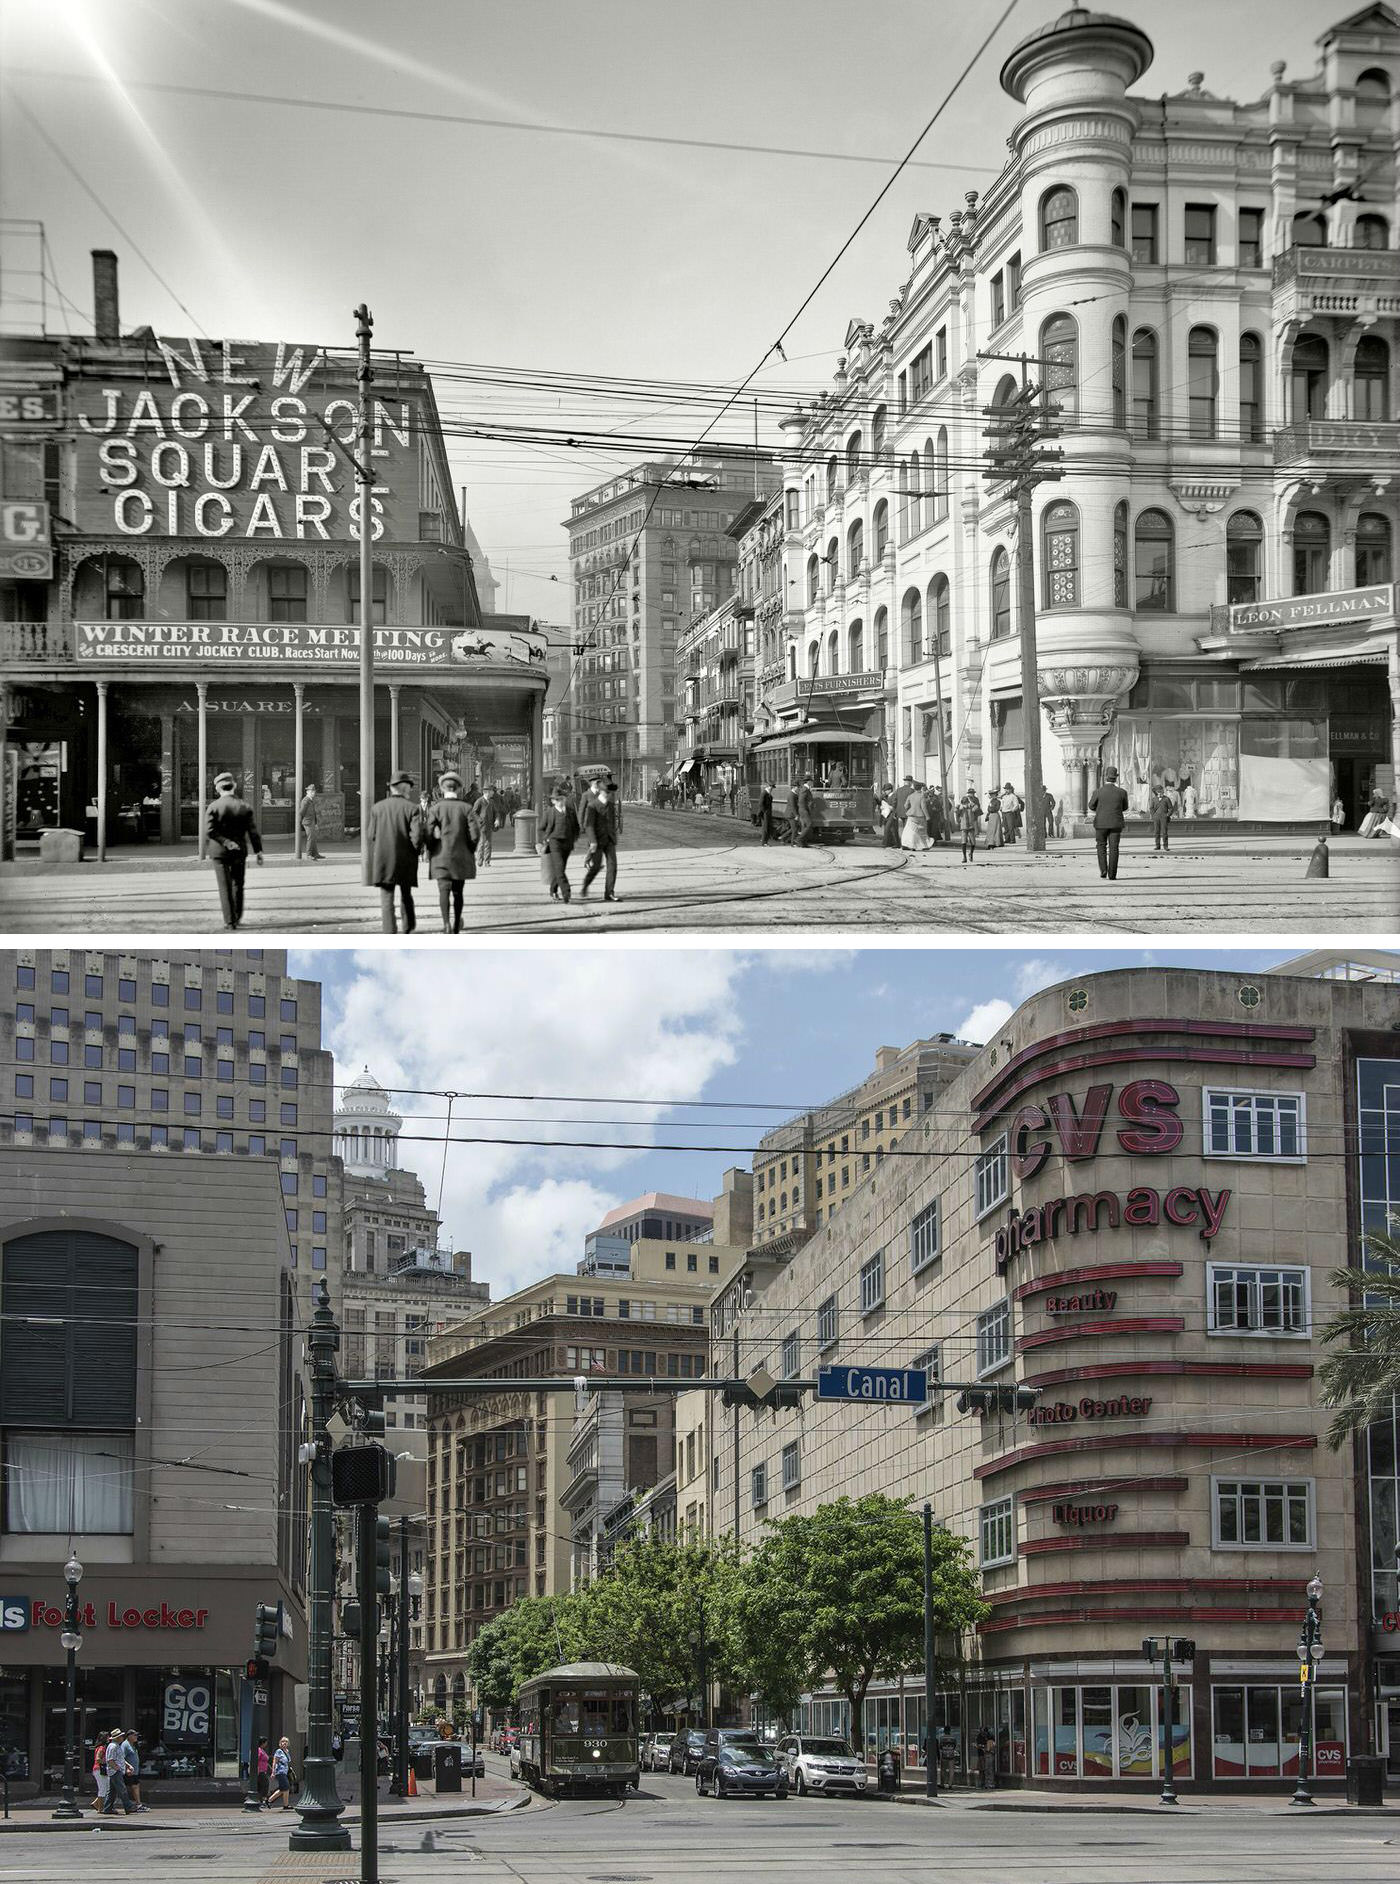 Canal and Carondolet, 1937 VS Canal and Carondolet, 2013